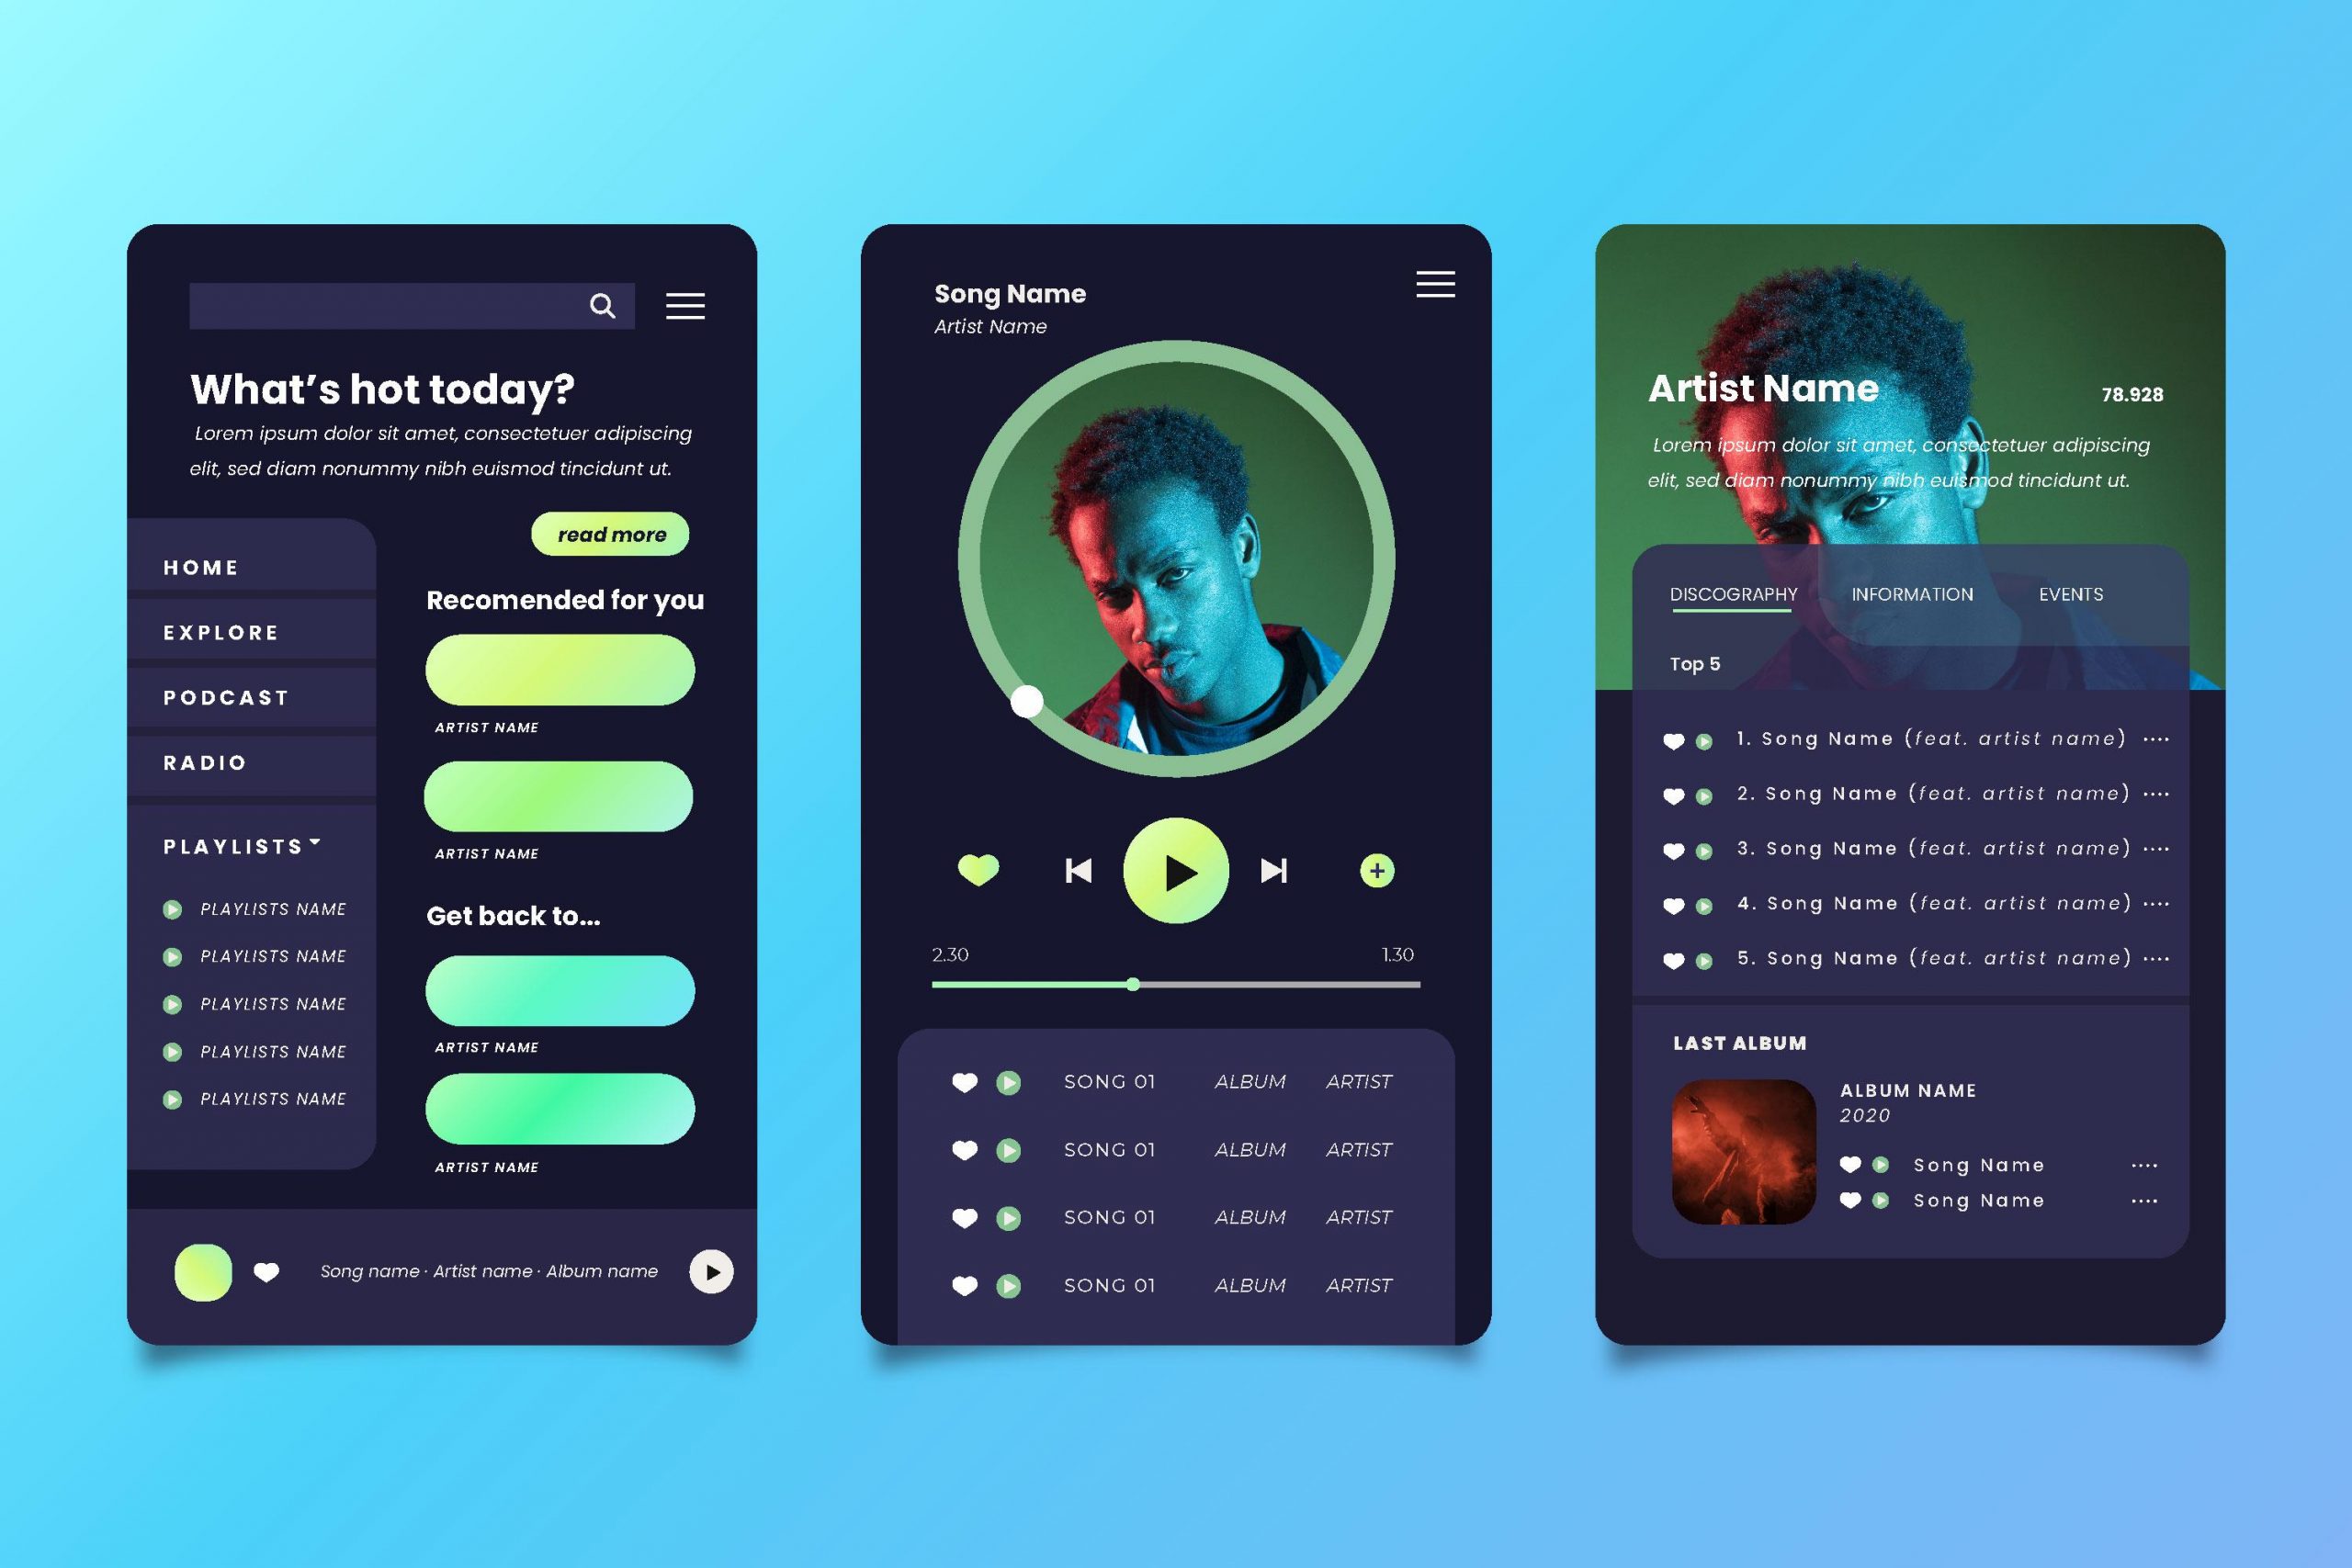 Stay Connected Even Offline With Spotify’s Offline Mix Feature!